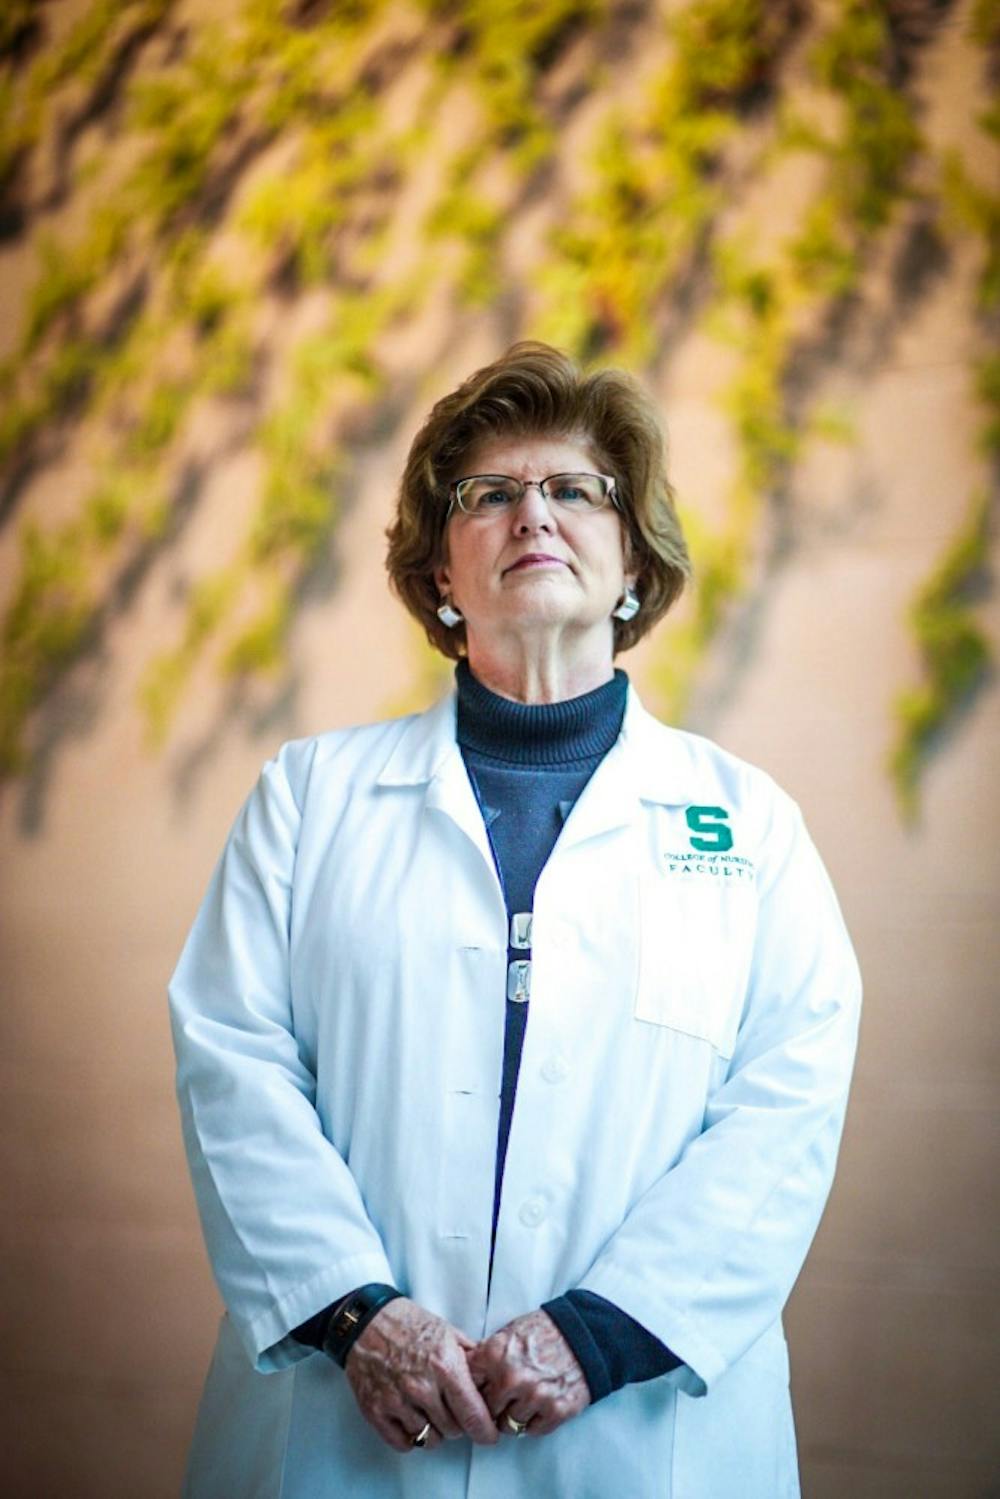 <p>Kathy Forrest, instructor and coordinator of professional programs in the College of Nursing, poses for a portrait on Nov. 9, 2017 at the Bott Building for Nursing Education and Research. Forrest educates nursing professionals or who people who are not yet licensed on human trafficking issues. "The most common type of human trafficking in Michigan is sex trafficking," Forrest said.&nbsp;</p>